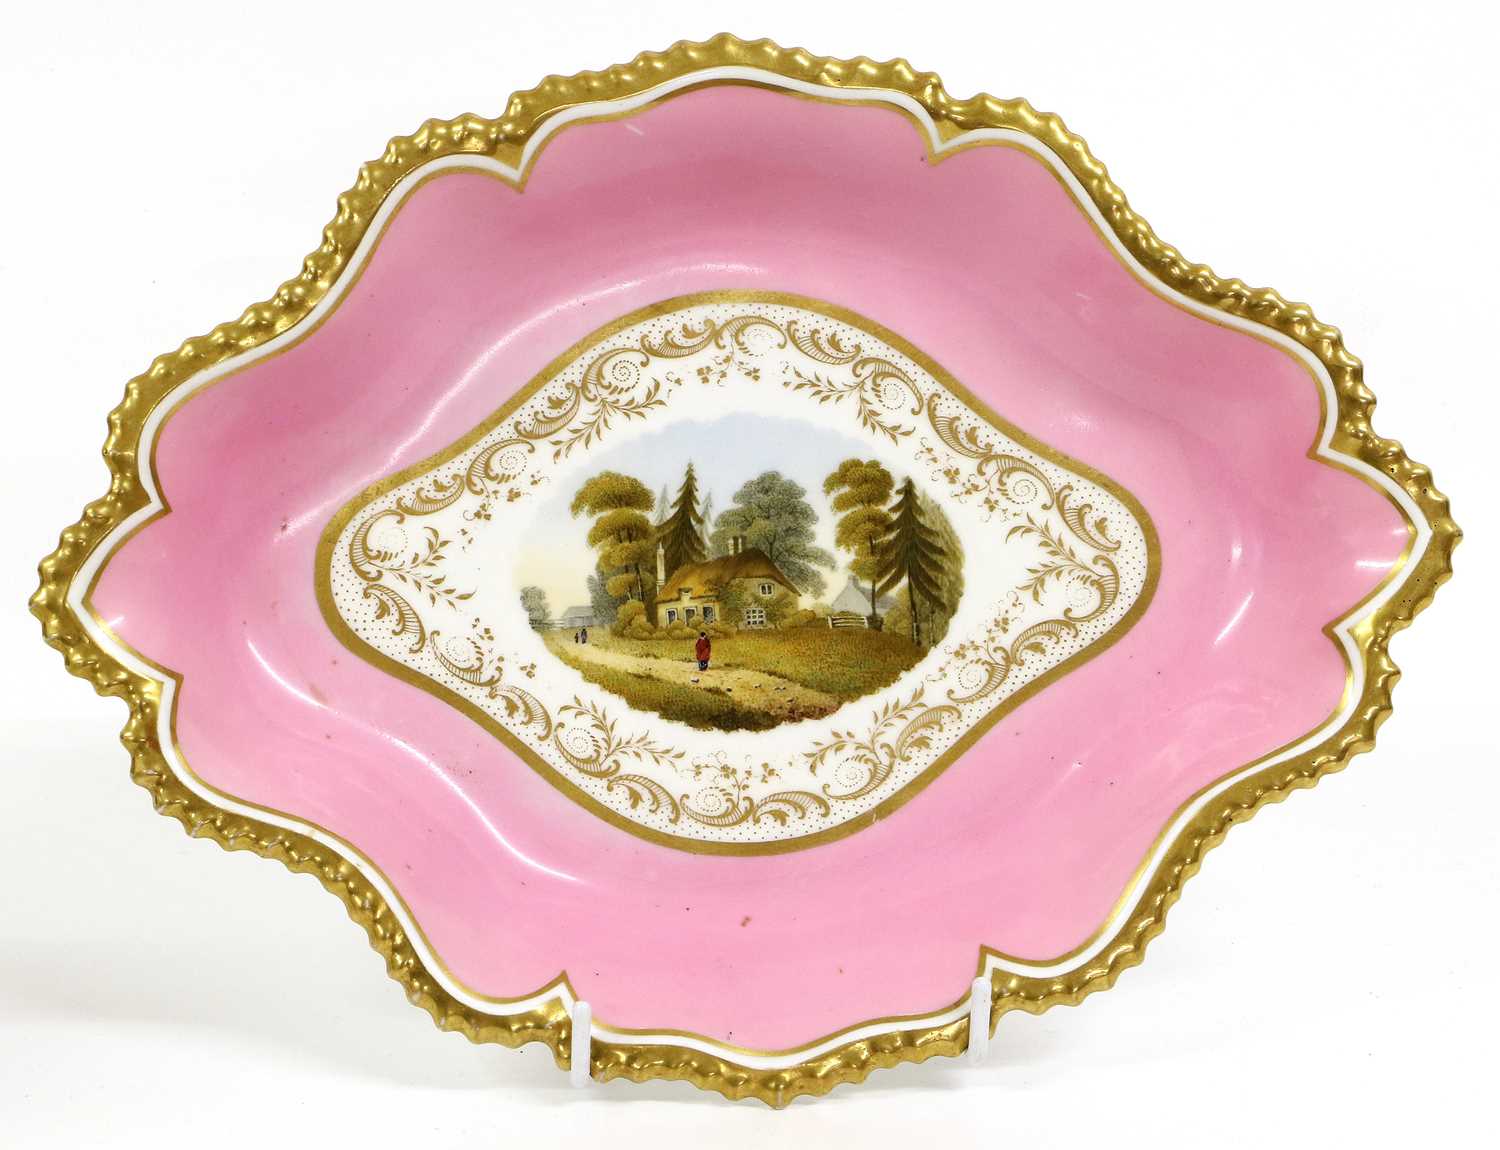 A Flight, Barr & Barr Worcester Porcelain Plate, circa 1820, painted with a tilted view "Malvern - Image 2 of 6